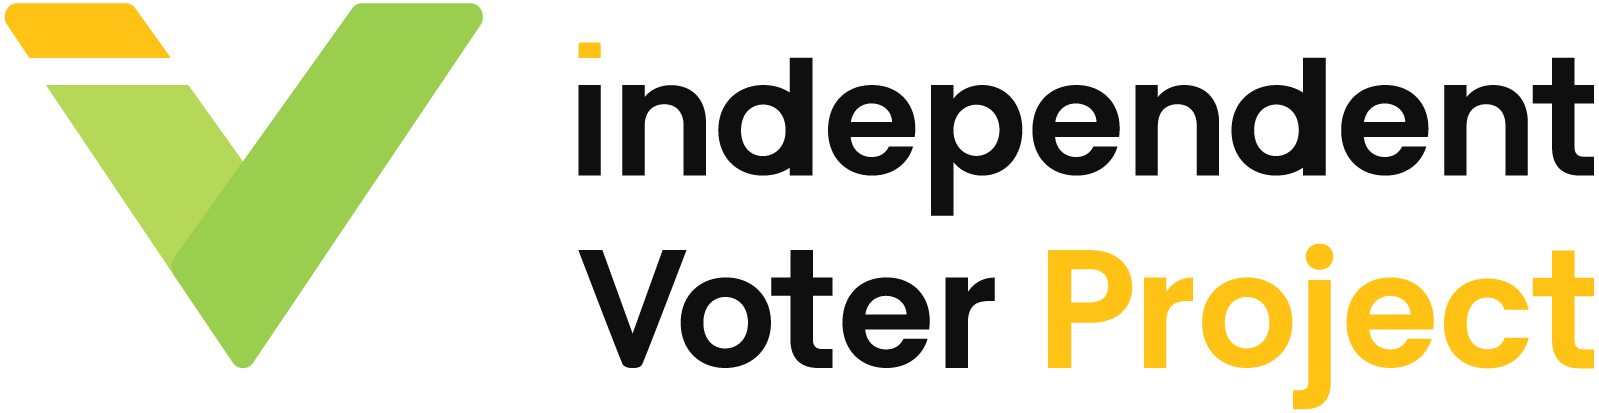 Independent Voter Project logo